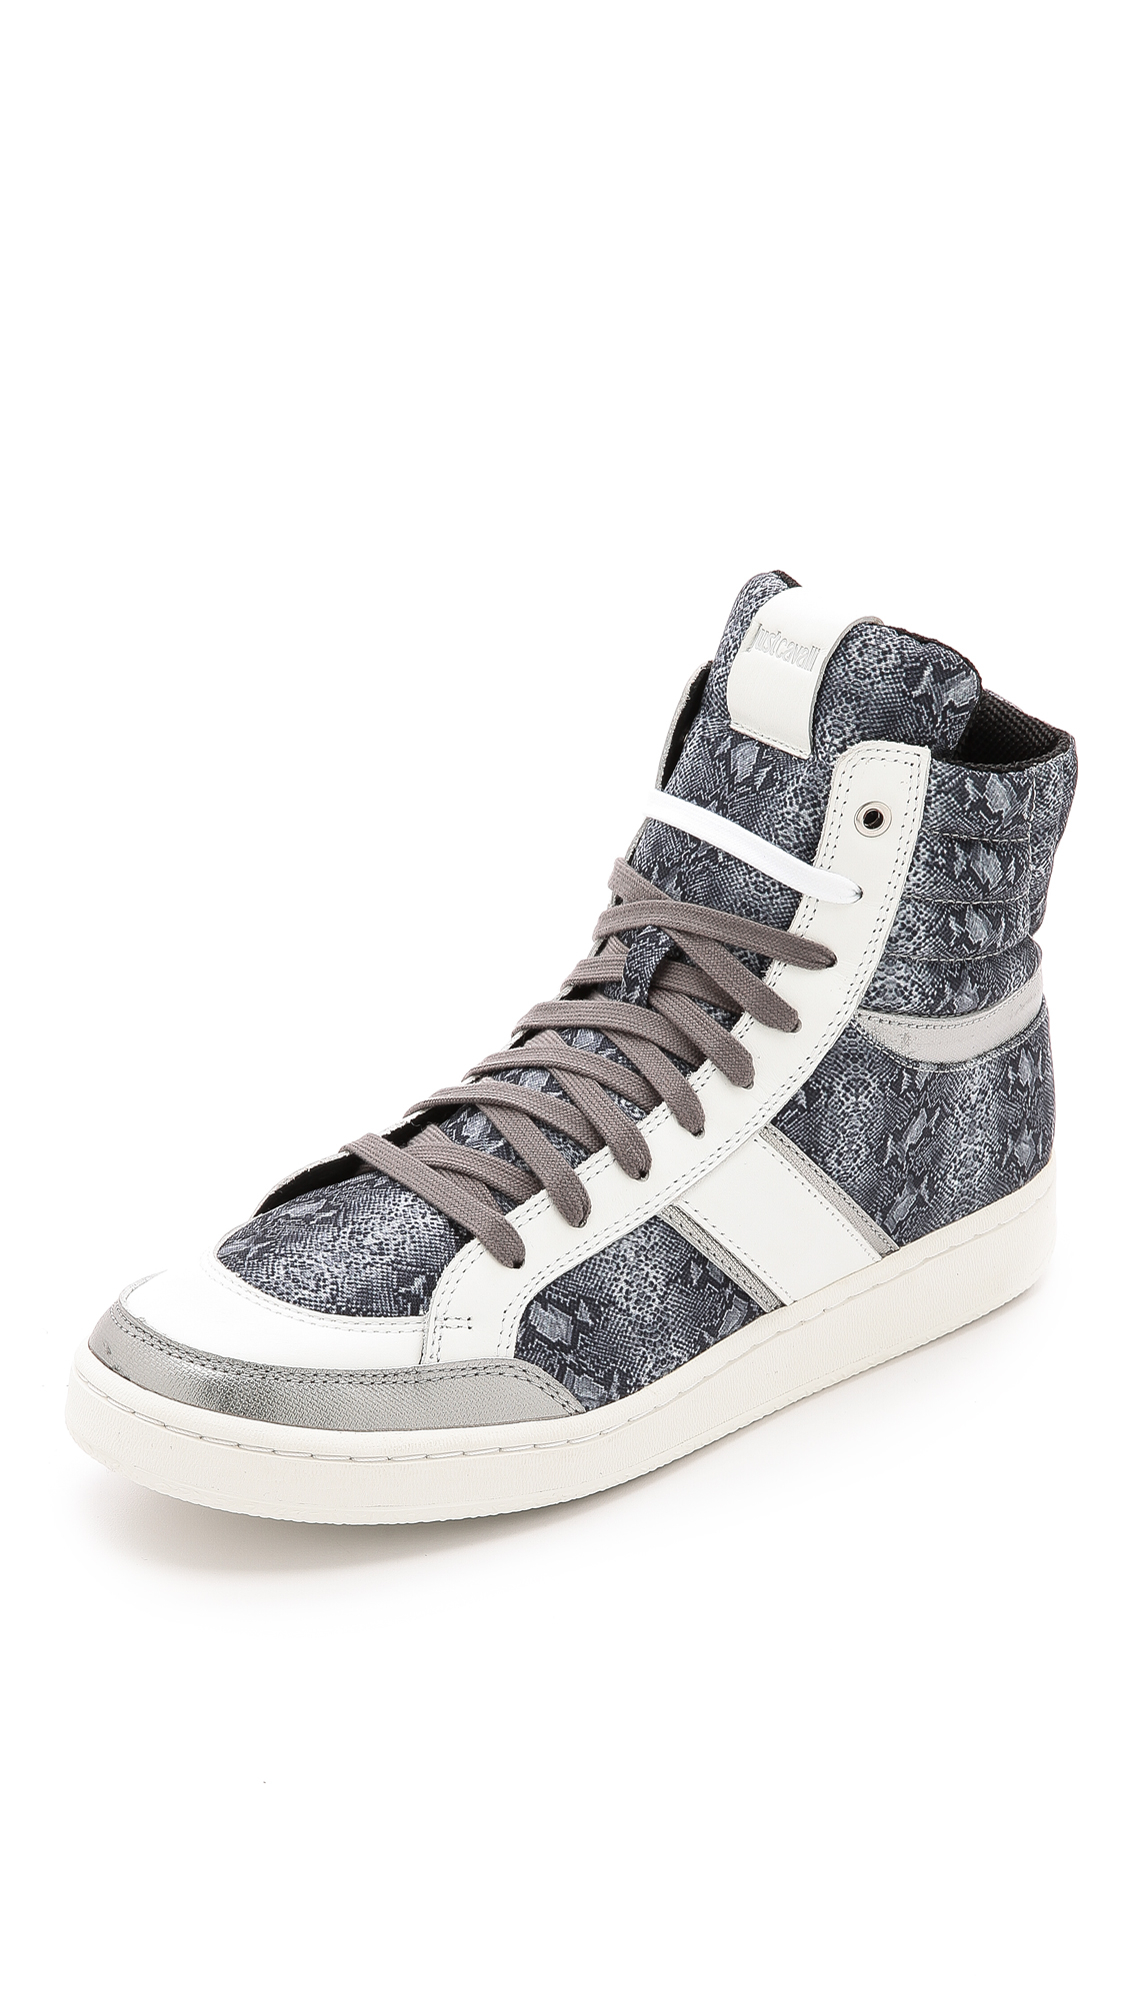 Just cavalli Python Print Sneakers in Animal for Men (Python) | Lyst